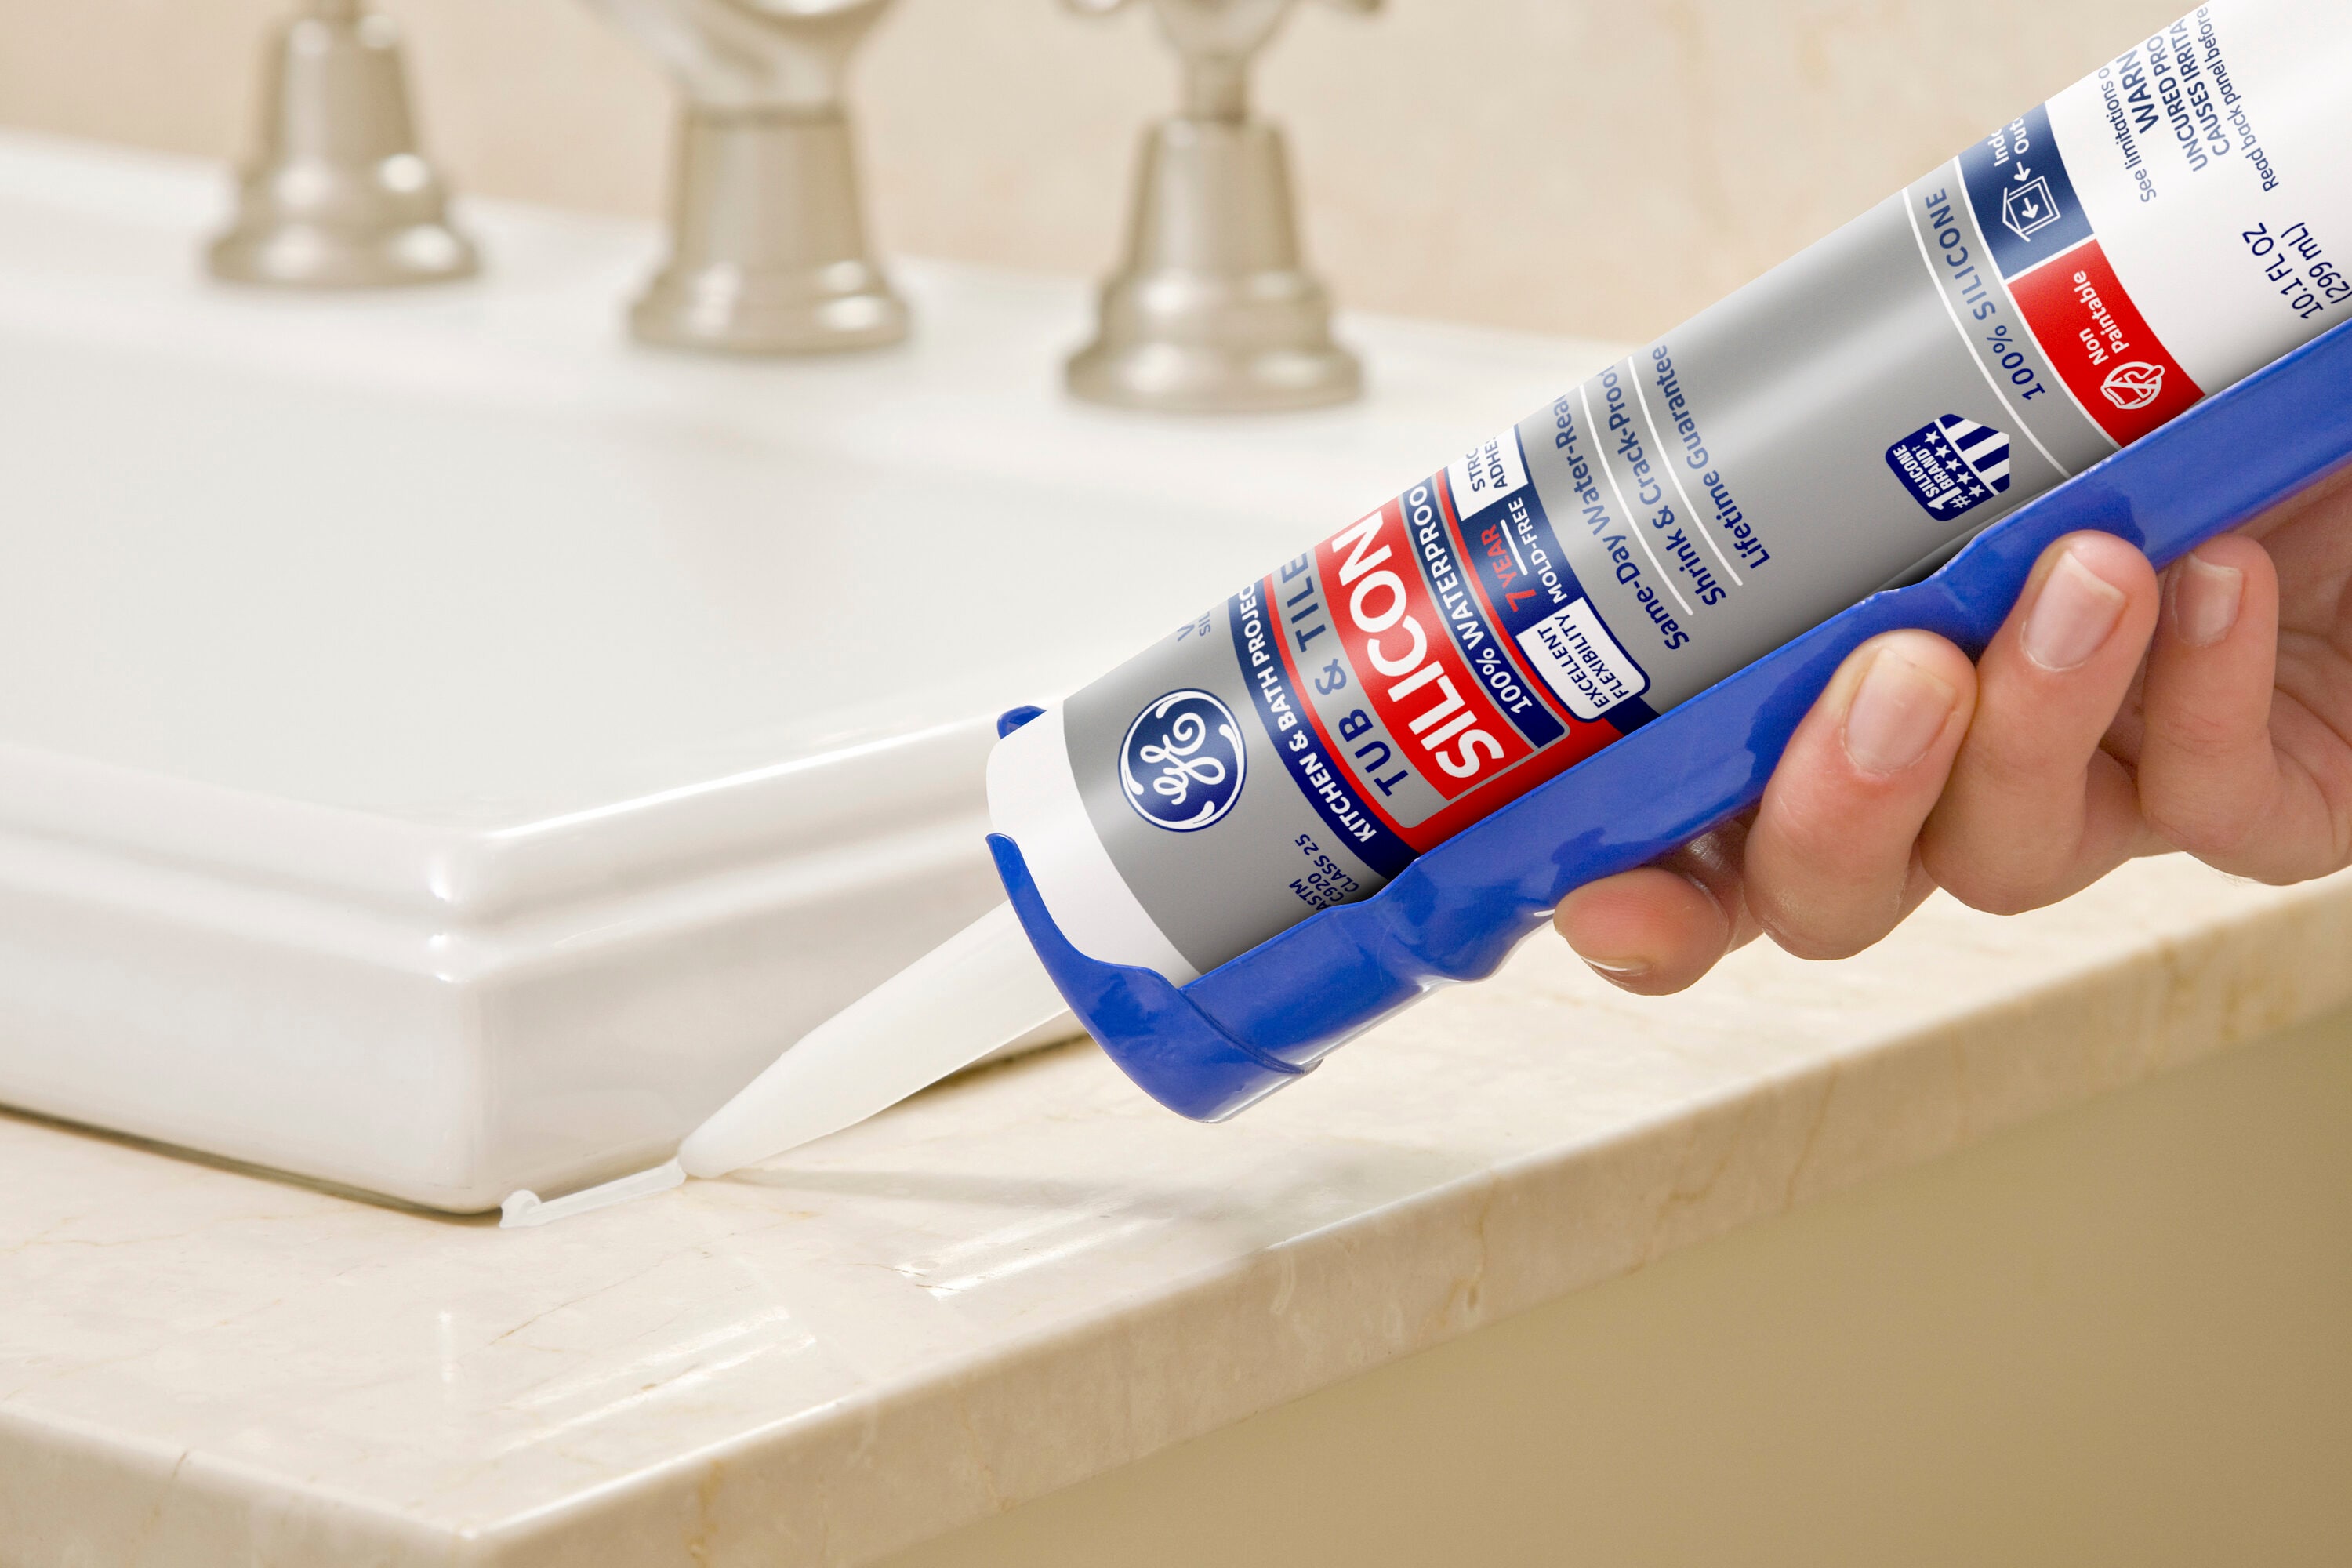 GE Silicone 1 Tub and Tile, Kitchen and Bath 10.1-oz White Silicone Caulk  in the Caulk department at